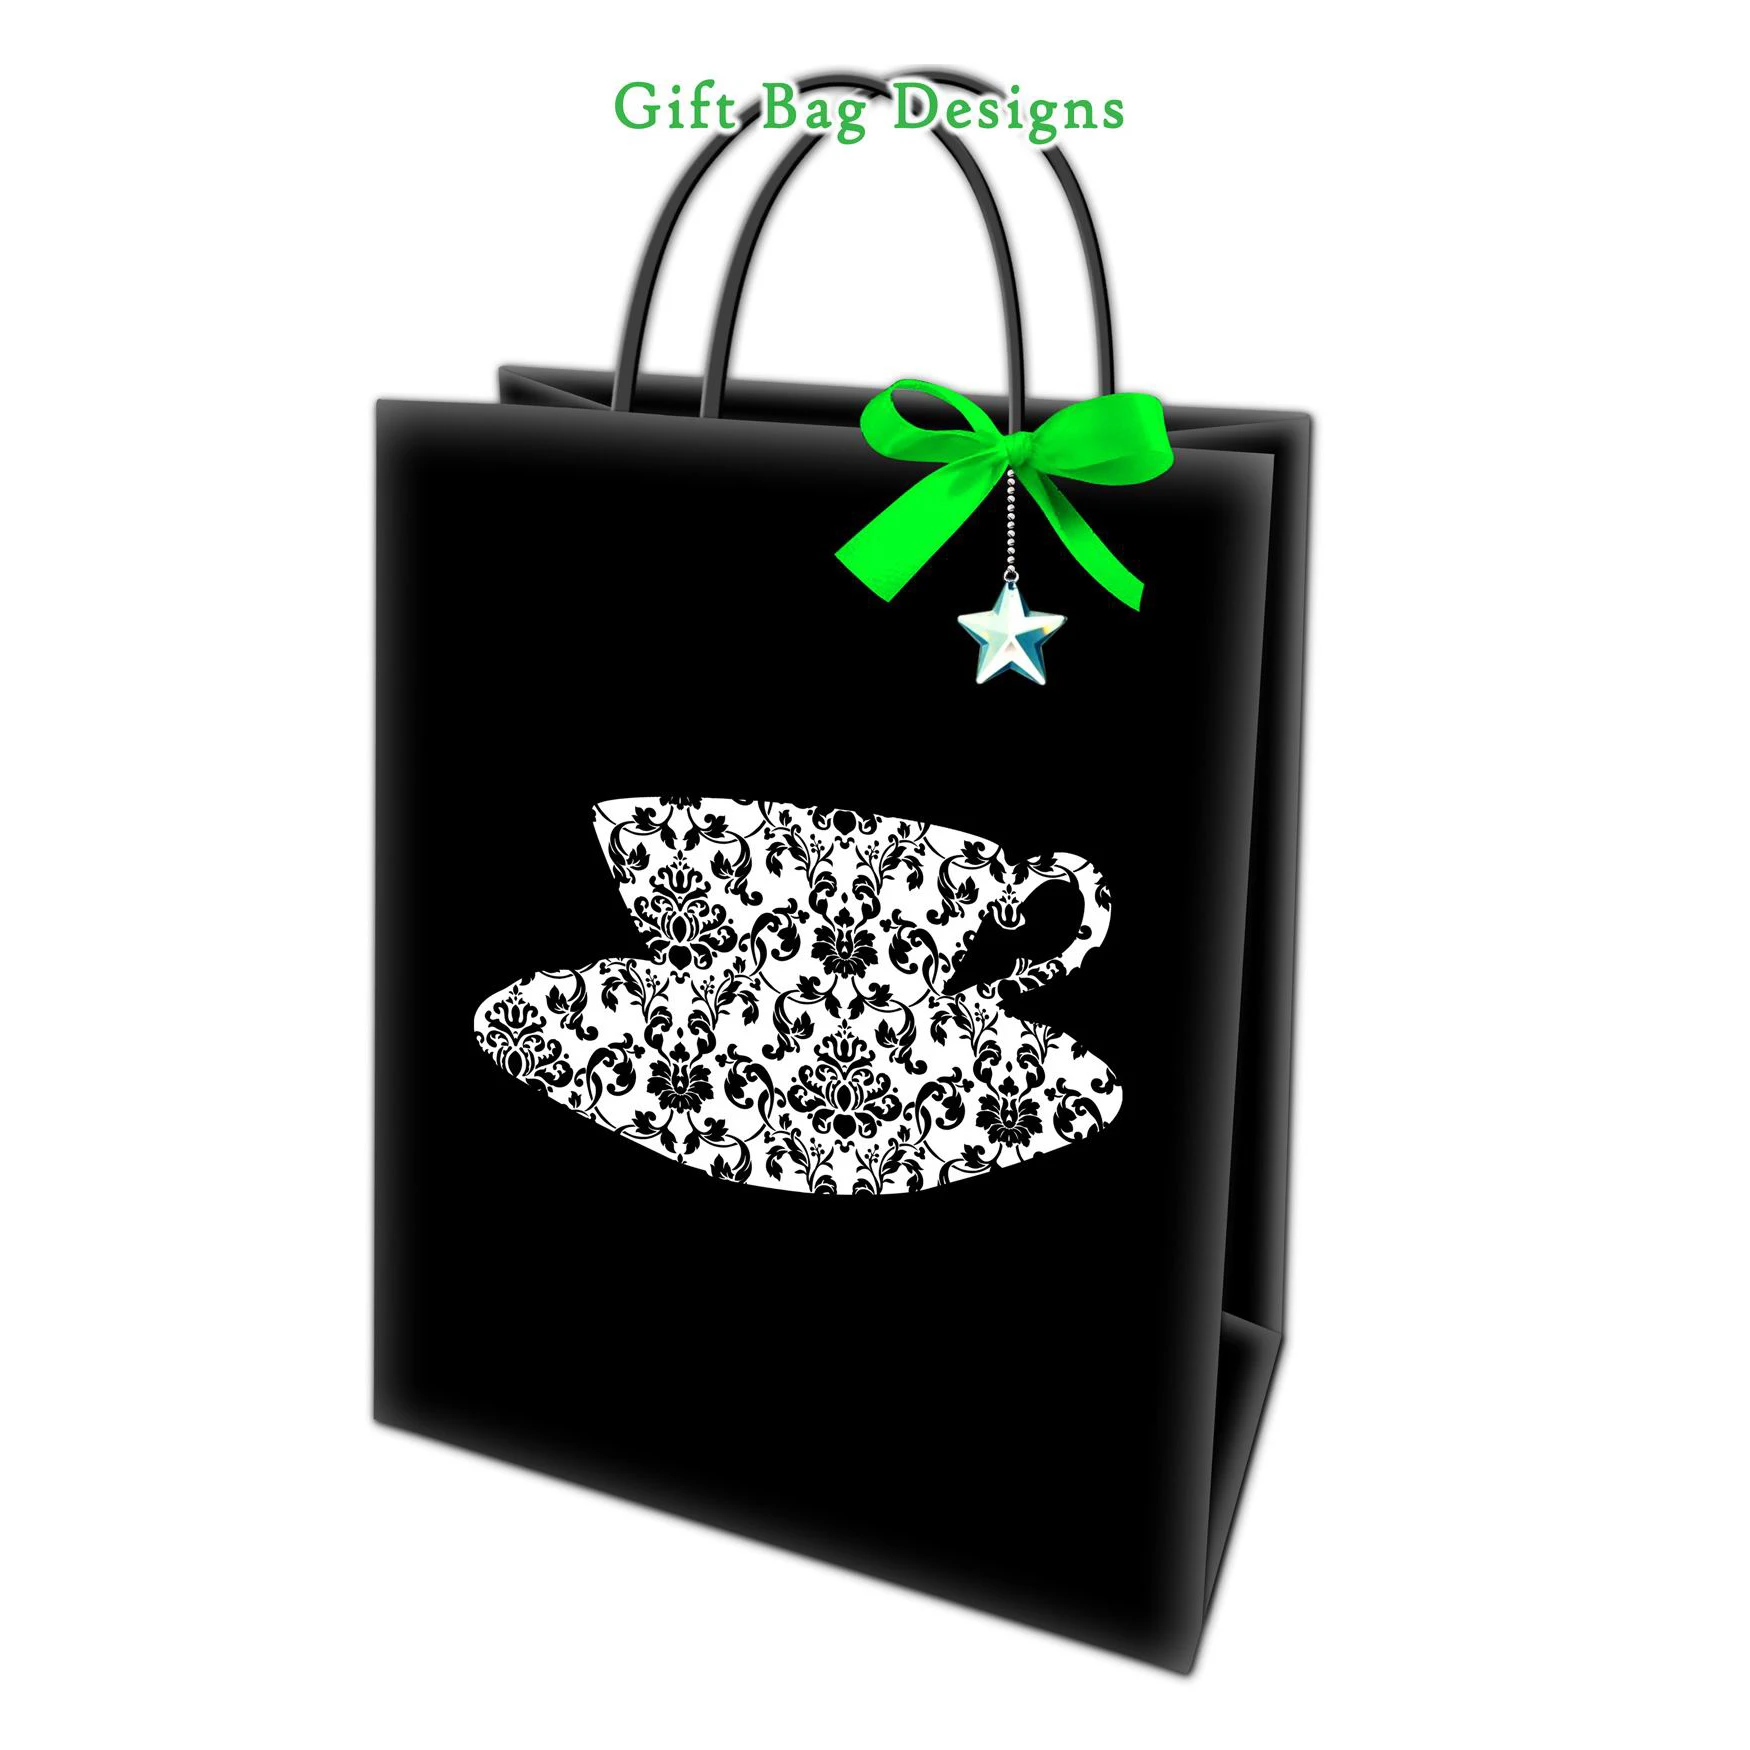 Jialan Package gift bags wholesale company for packing gifts-8